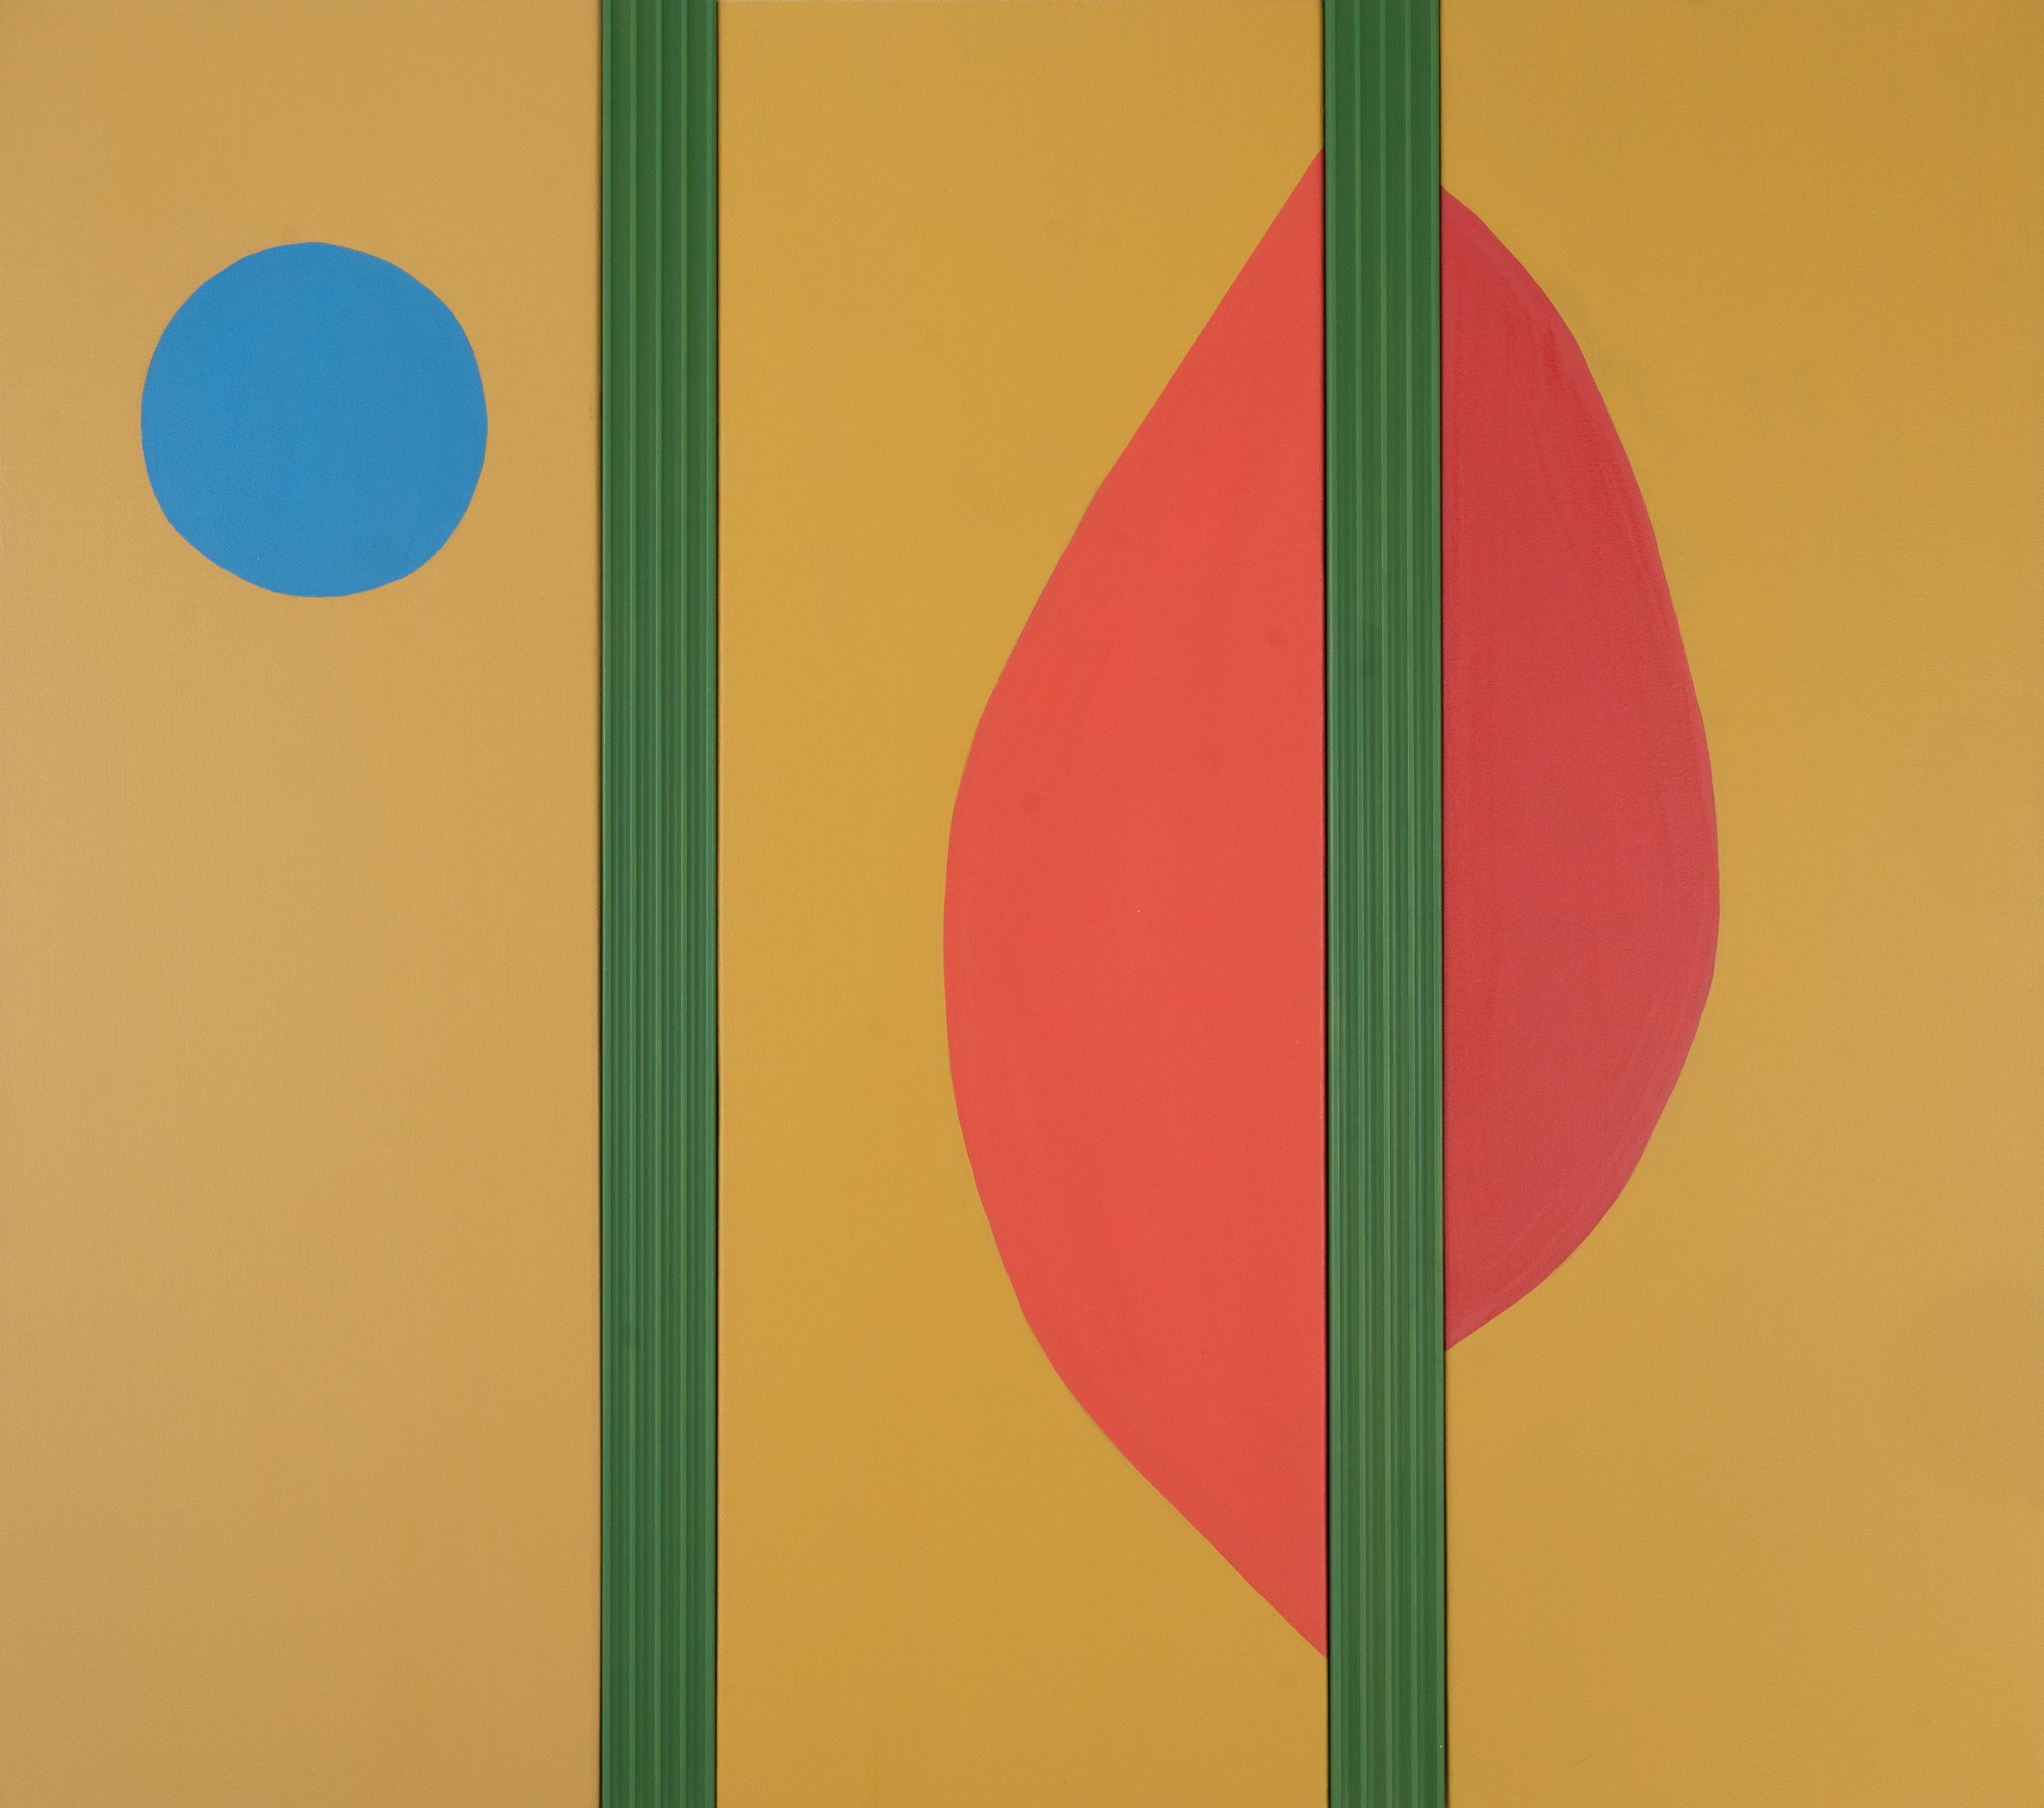 Three Panel Botanical (Sunshine in the Garden), 2022, acrylic on canvas and wood, 36x40.5 inches